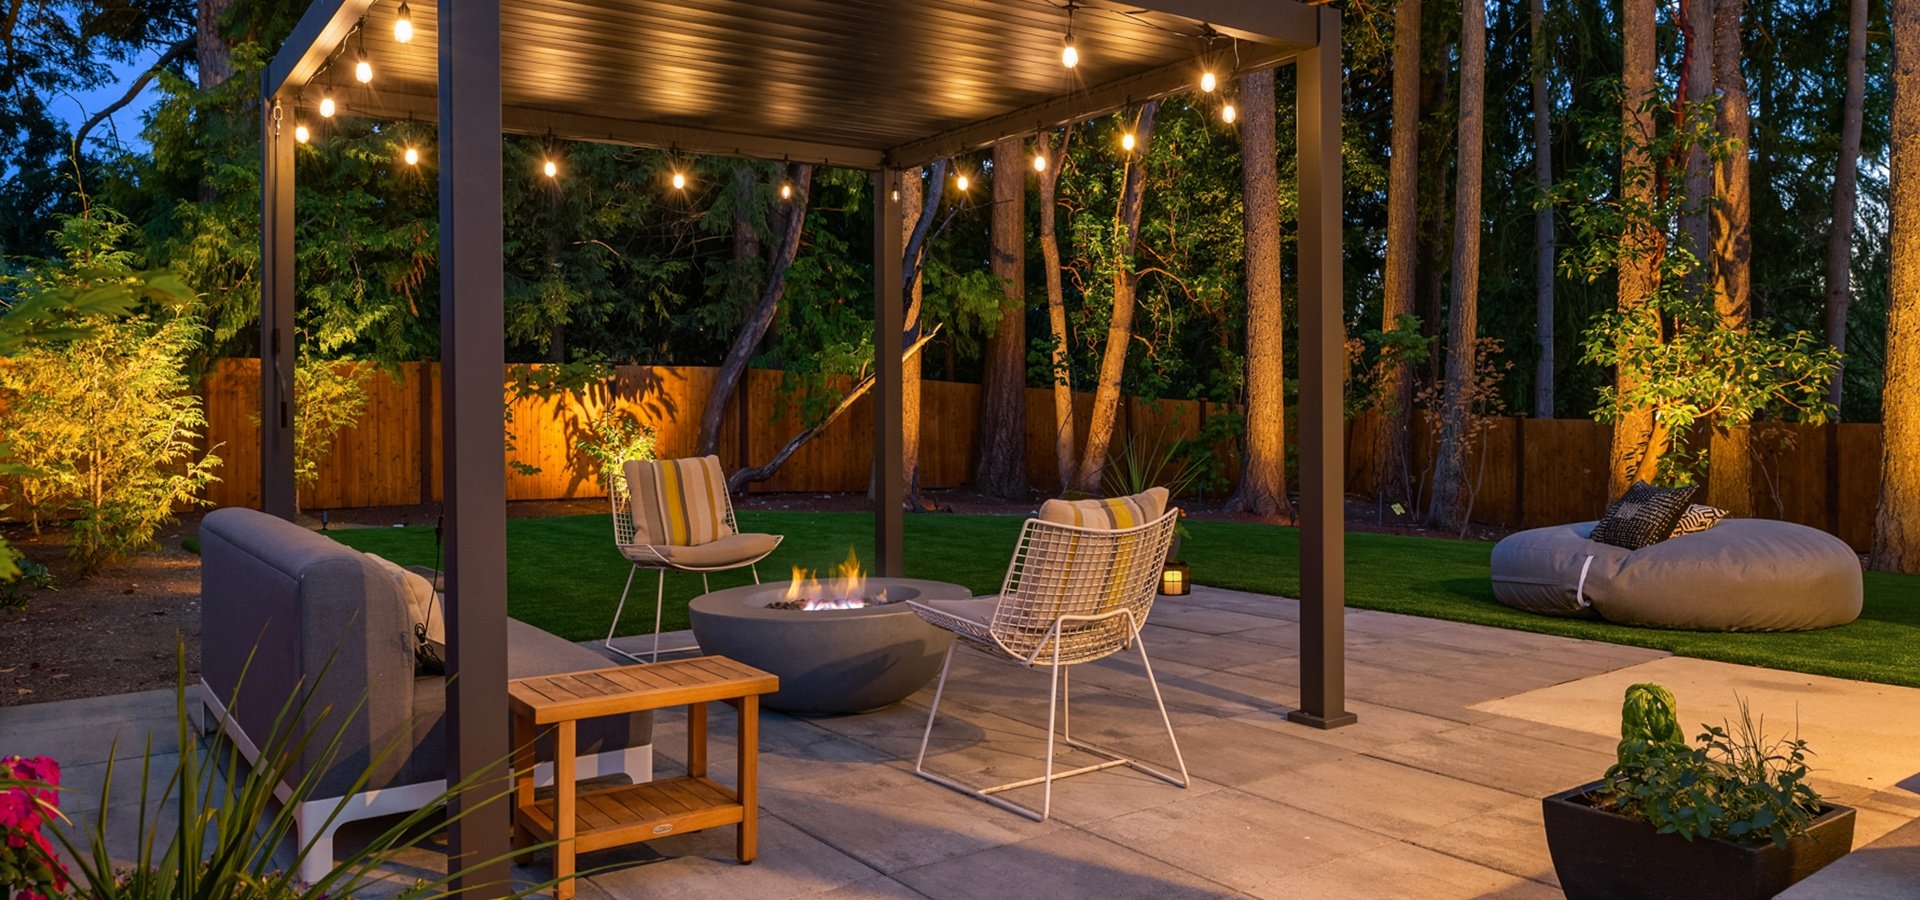 Landscape design with fire pit and pergola in Issaquah, WA